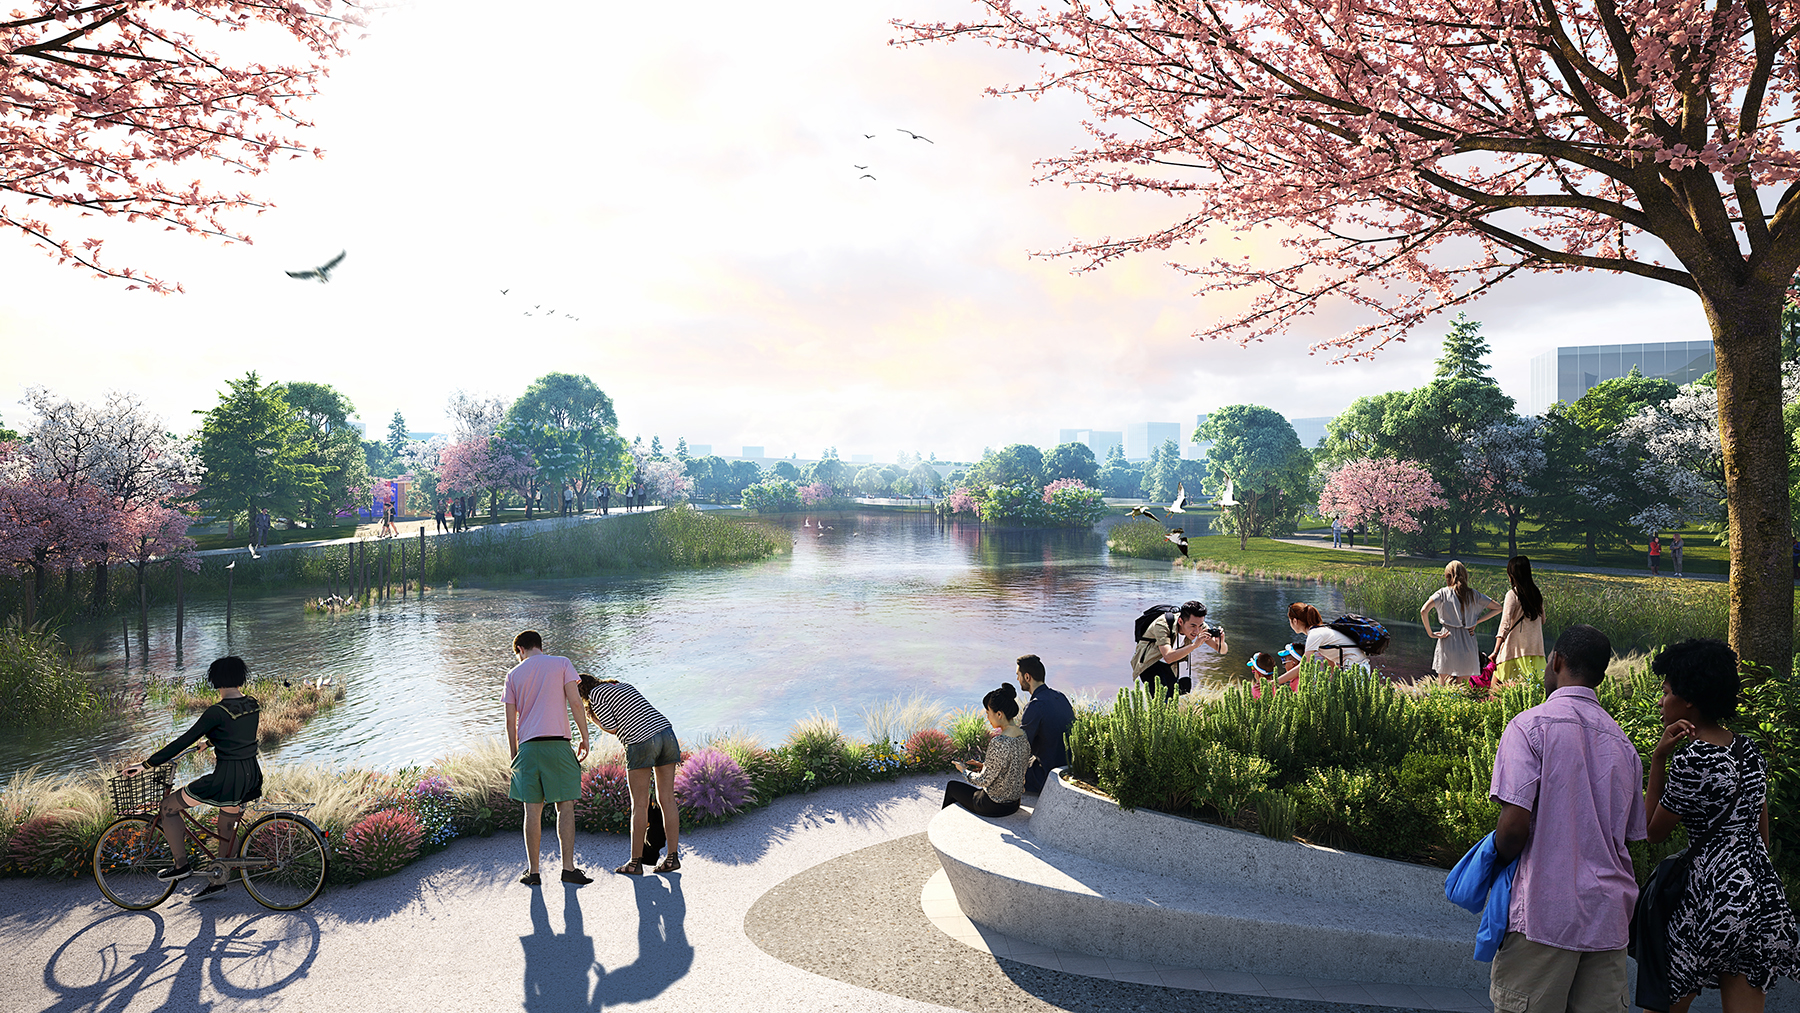 The former Olympic kayak center will become a lake that collects rain in the winter and dries out in the summer, save for the water volume needed to keep the bentonite liner functional. (Rendering courtesy of Sasaki)